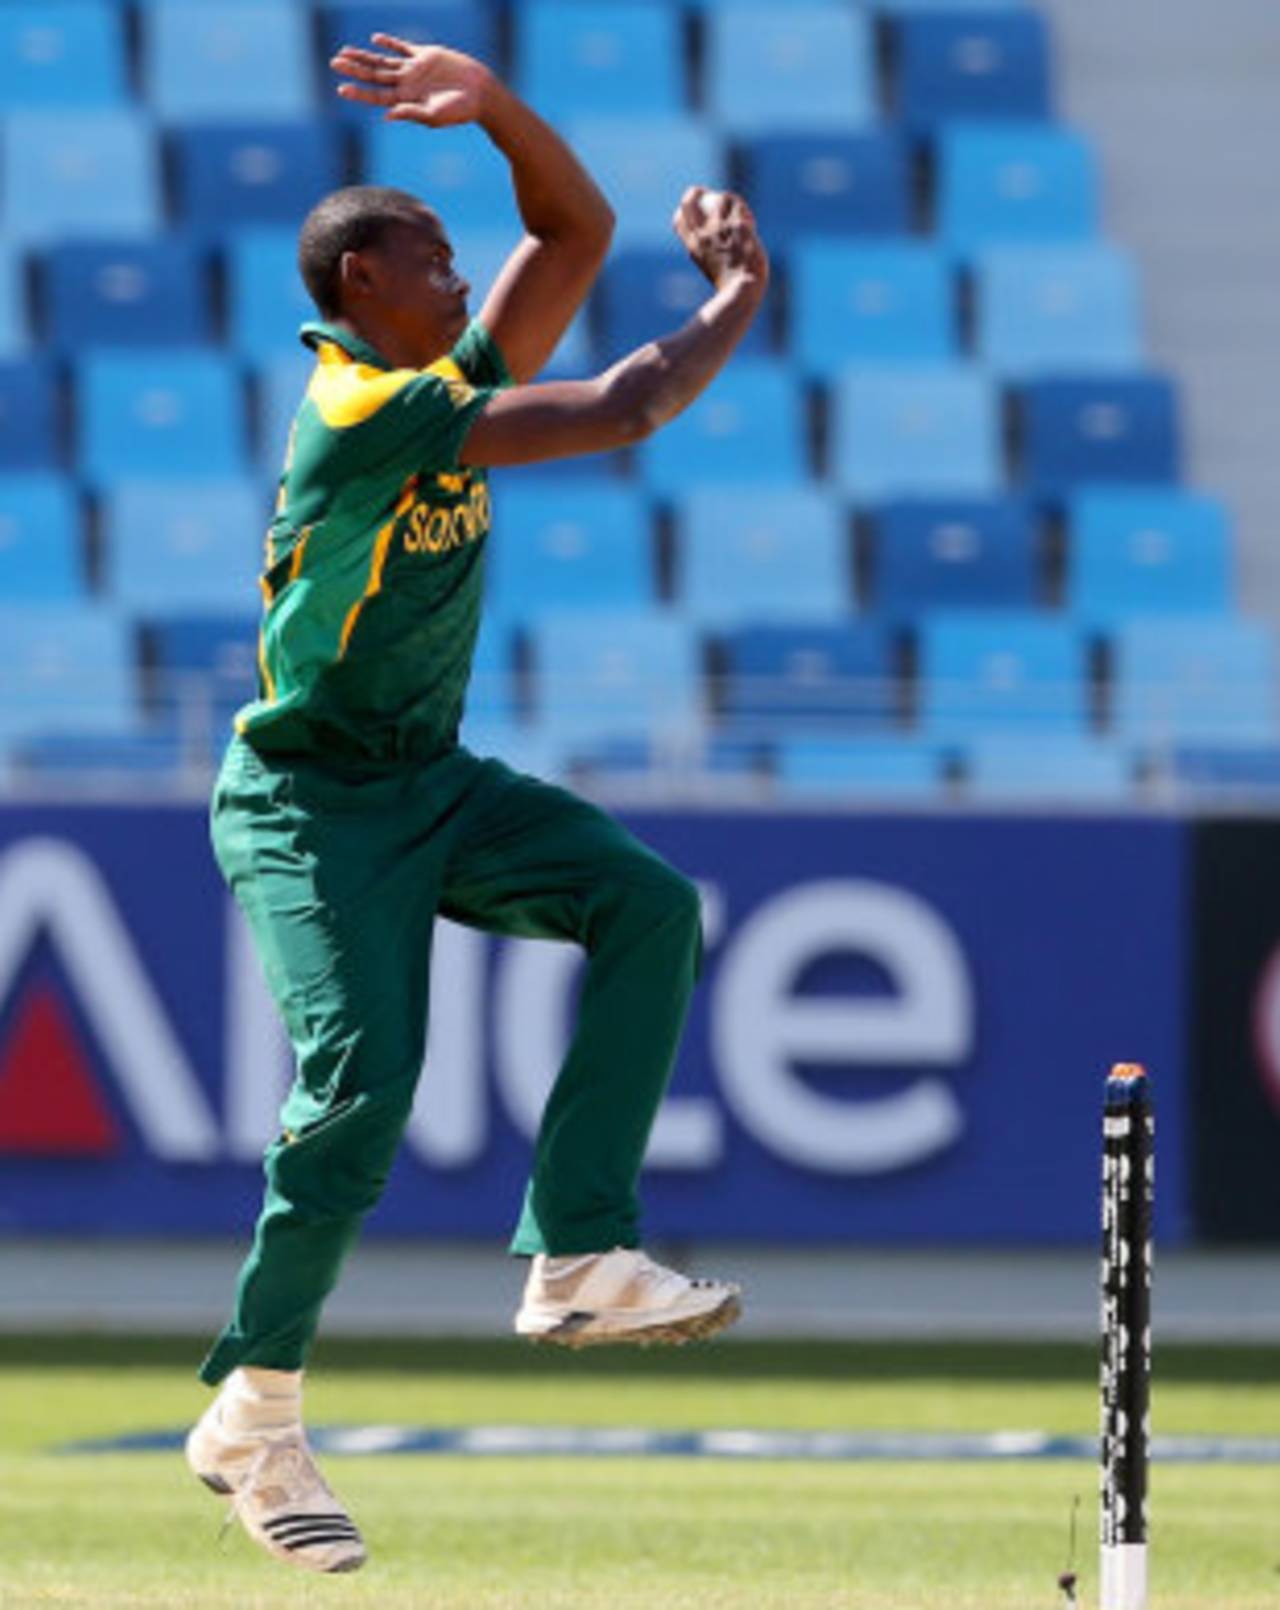 Kagiso Rabada in his delivery stride, South Africa Under-19s v West Indies Under-19s, ICC Under-19 World Cup, Dubai, February 14, 2014